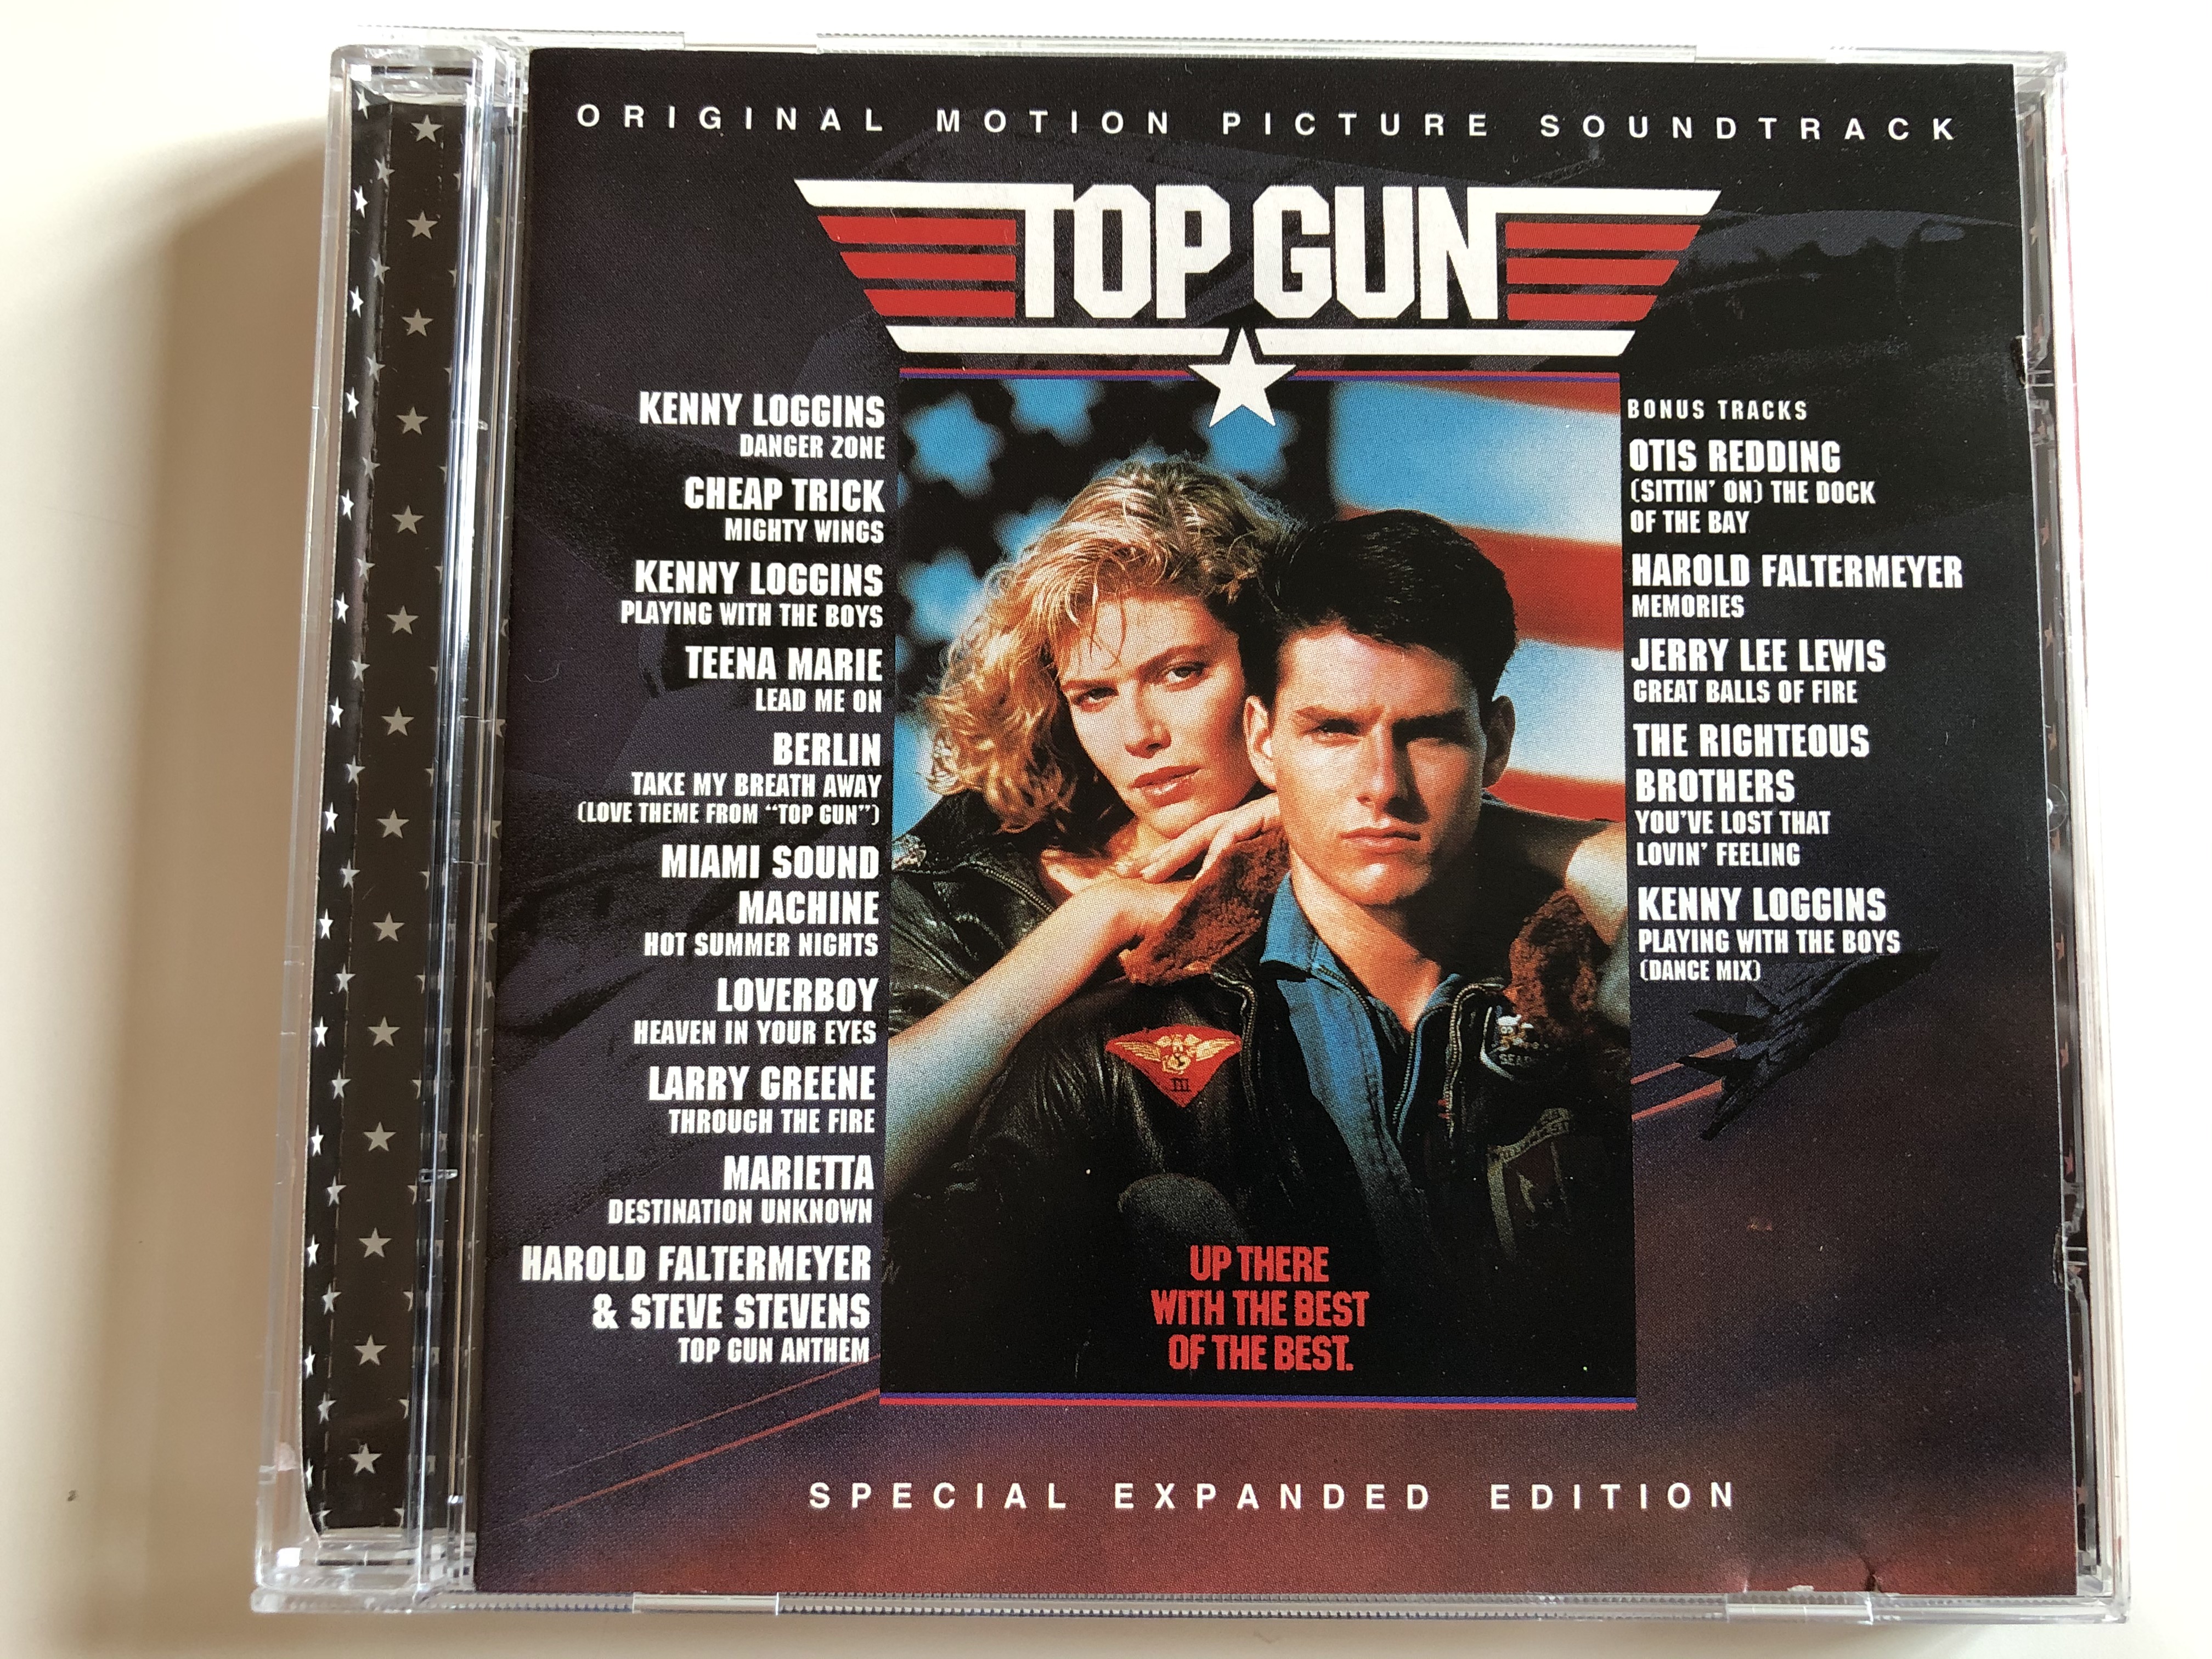 original-motion-picture-soundtrack-top-gun-special-expanded-edition-kenny-loggins-danger-zone-cheap-trick-mighty-wings-kenny-loggins-playing-with-the-boys-teena-marie-lead-me-on...-columbi-1-.jpg